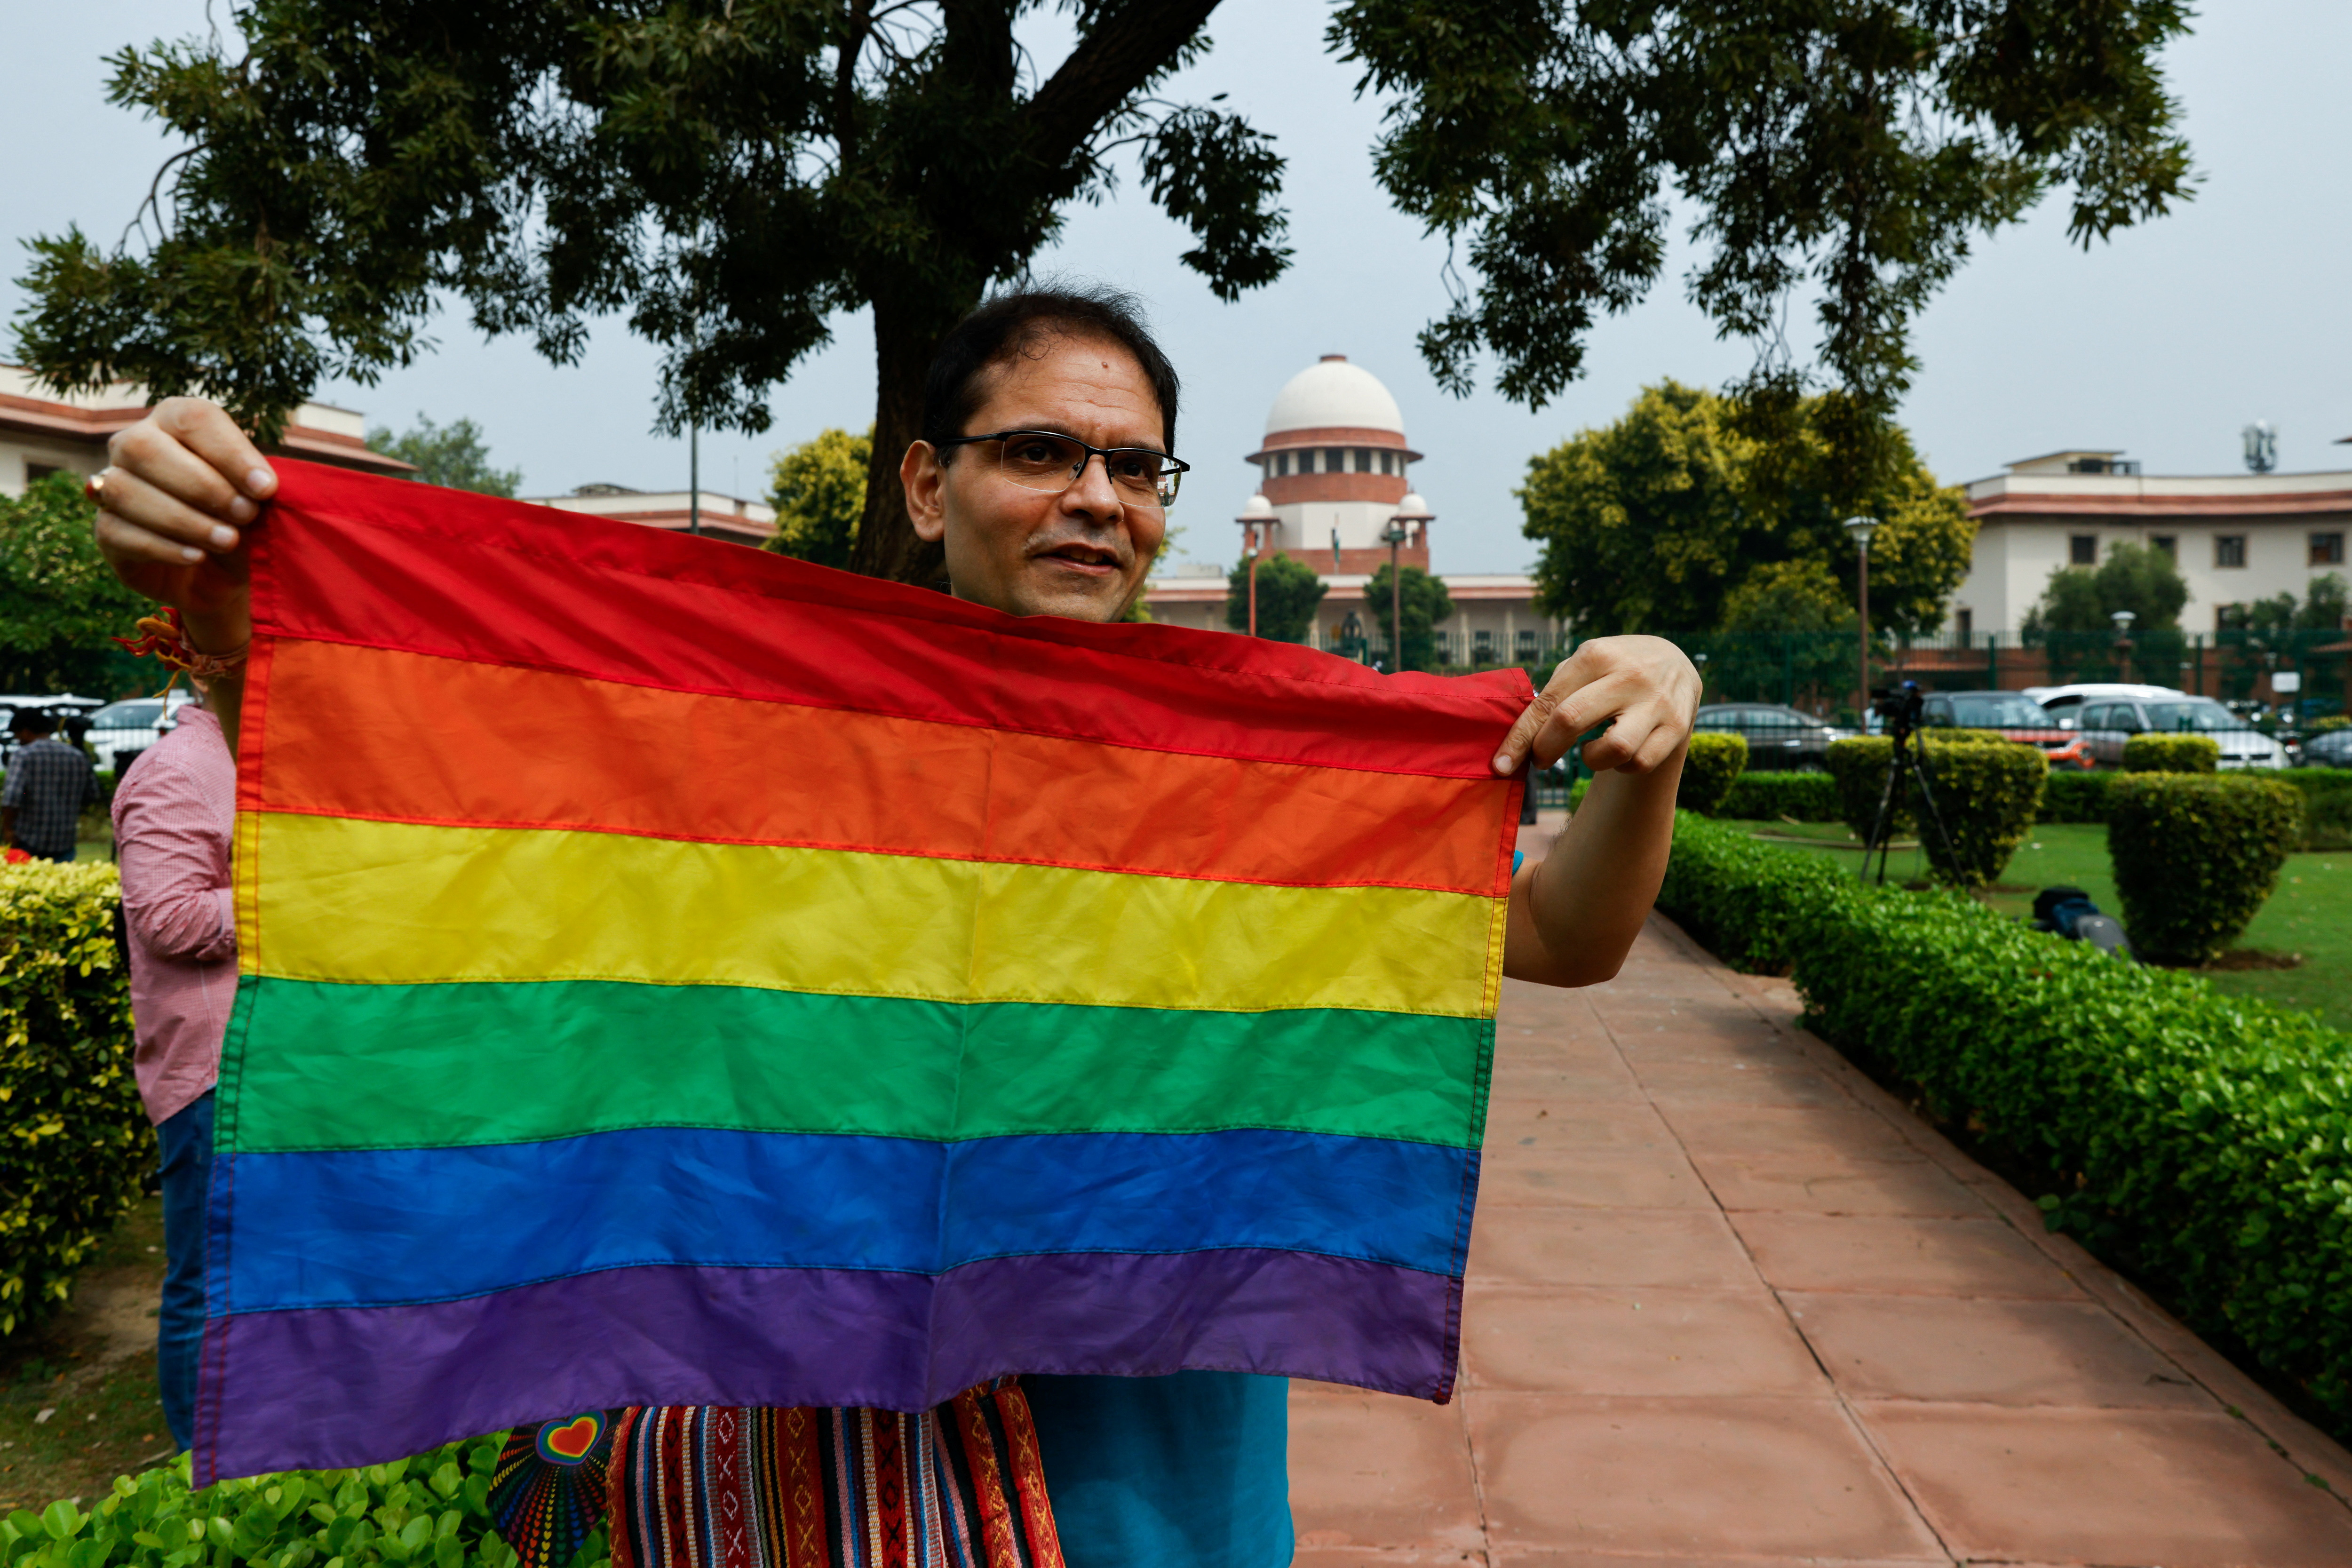 Indiantopxxx - India's top court declines to legalise same-sex marriage | Reuters